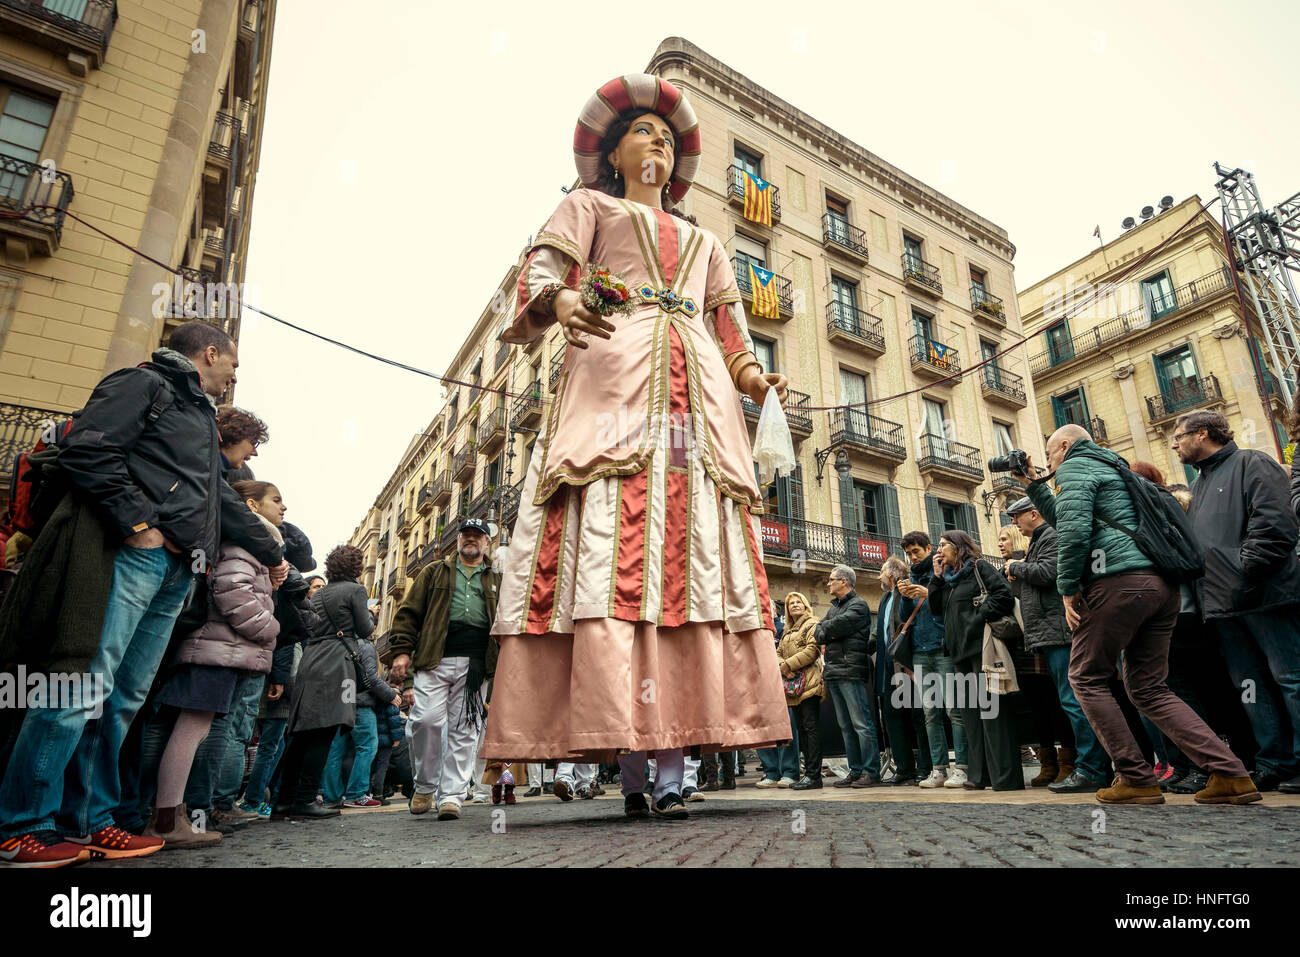 Barcelona, Spain. 12th Feb, 2017. The 'Gegant' (giant) dances among the crowd in front of Barcelona's town hall during the Santa Eulalia festival Credit: Matthias Oesterle/Alamy Live News Stock Photo